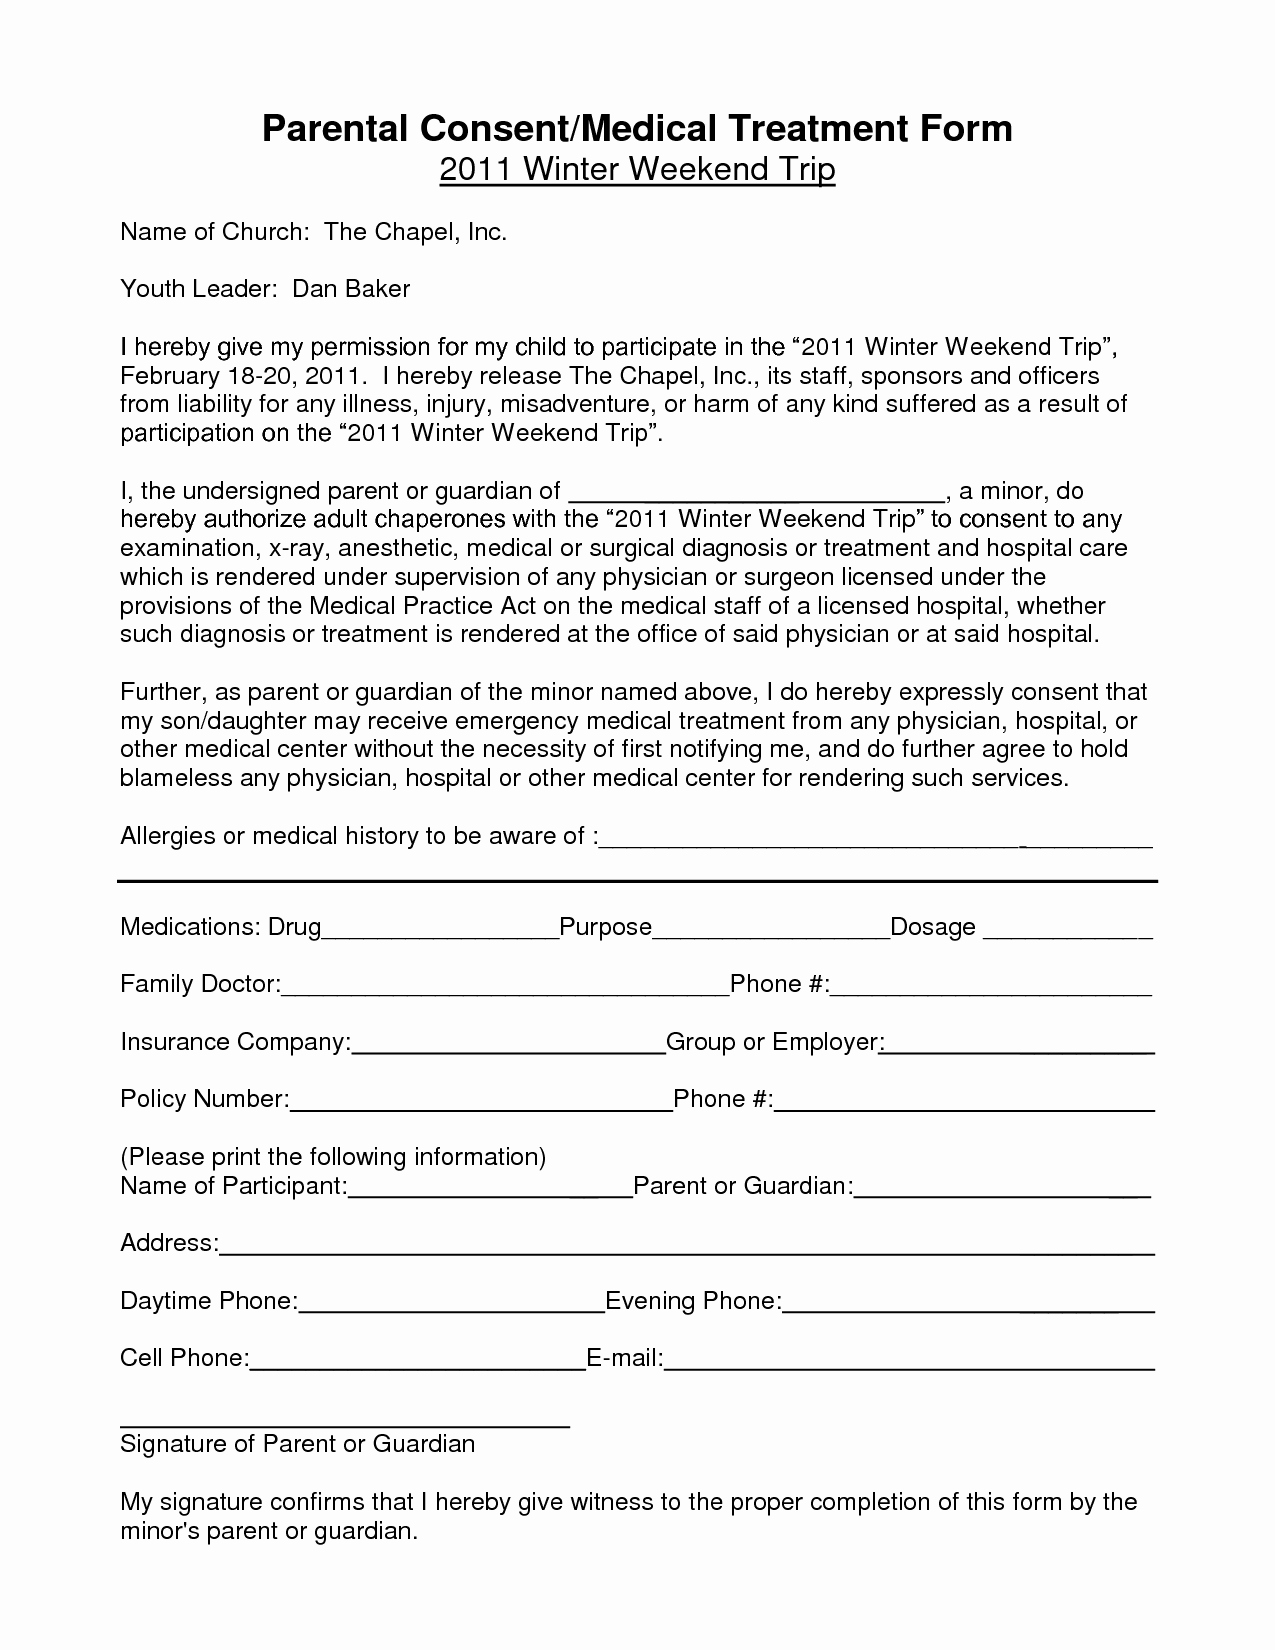 Fake Field Trip form Beautiful Notarized Medical Consent form for Minor